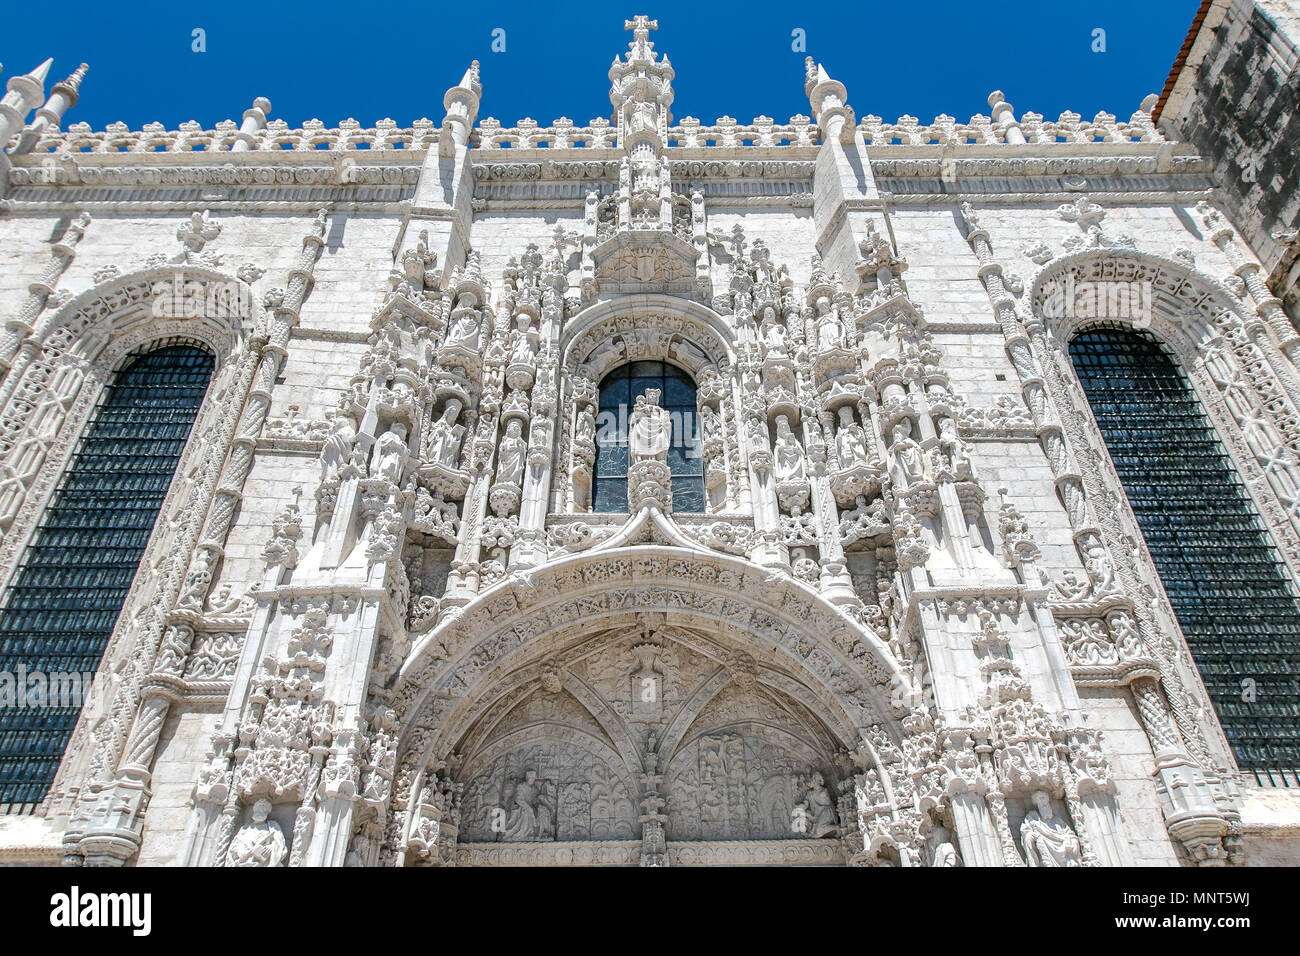 View of the famous Jeronimos Monastery in Belem, Lisbon, Portugal. Stock Photo